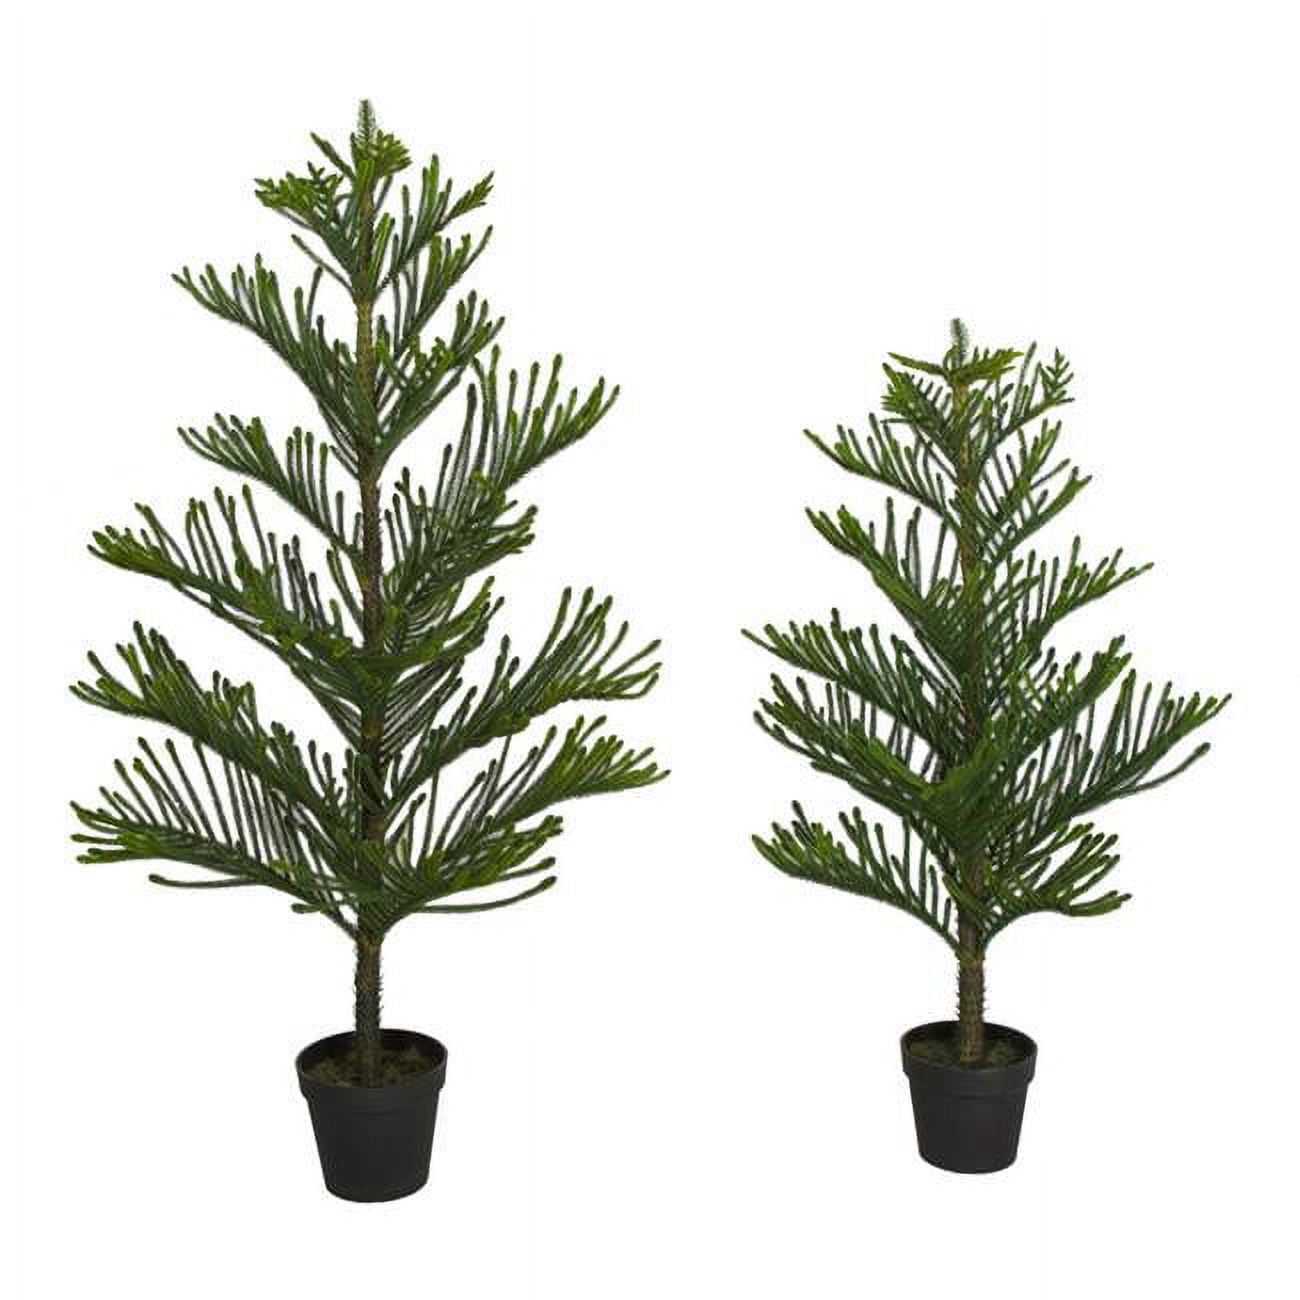 Pack of 5 Christmas Artificial Pine Branches for Decorating and Gift